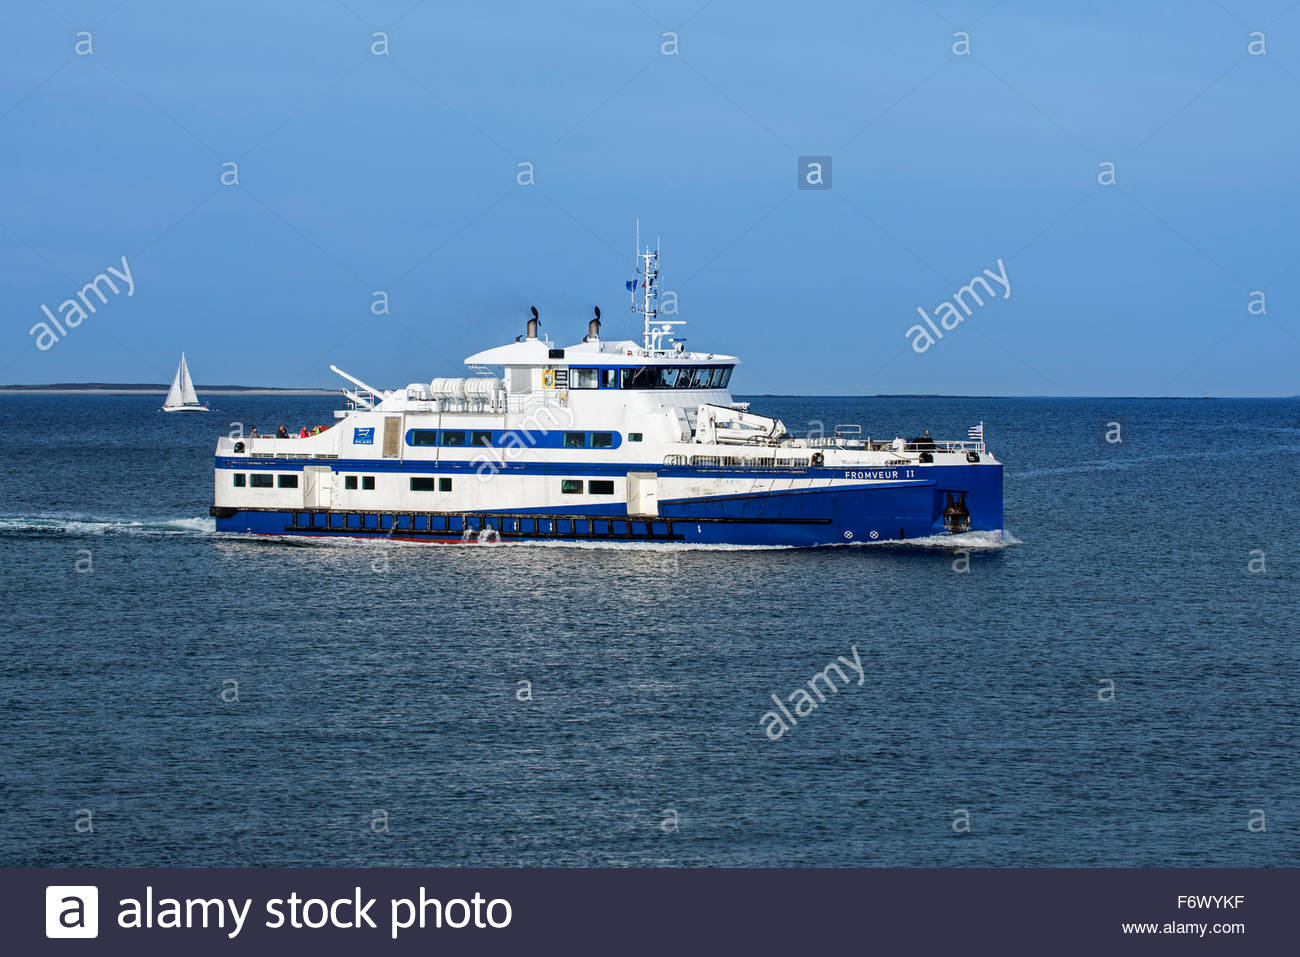 Amazing Ferry Boat Pictures & Backgrounds